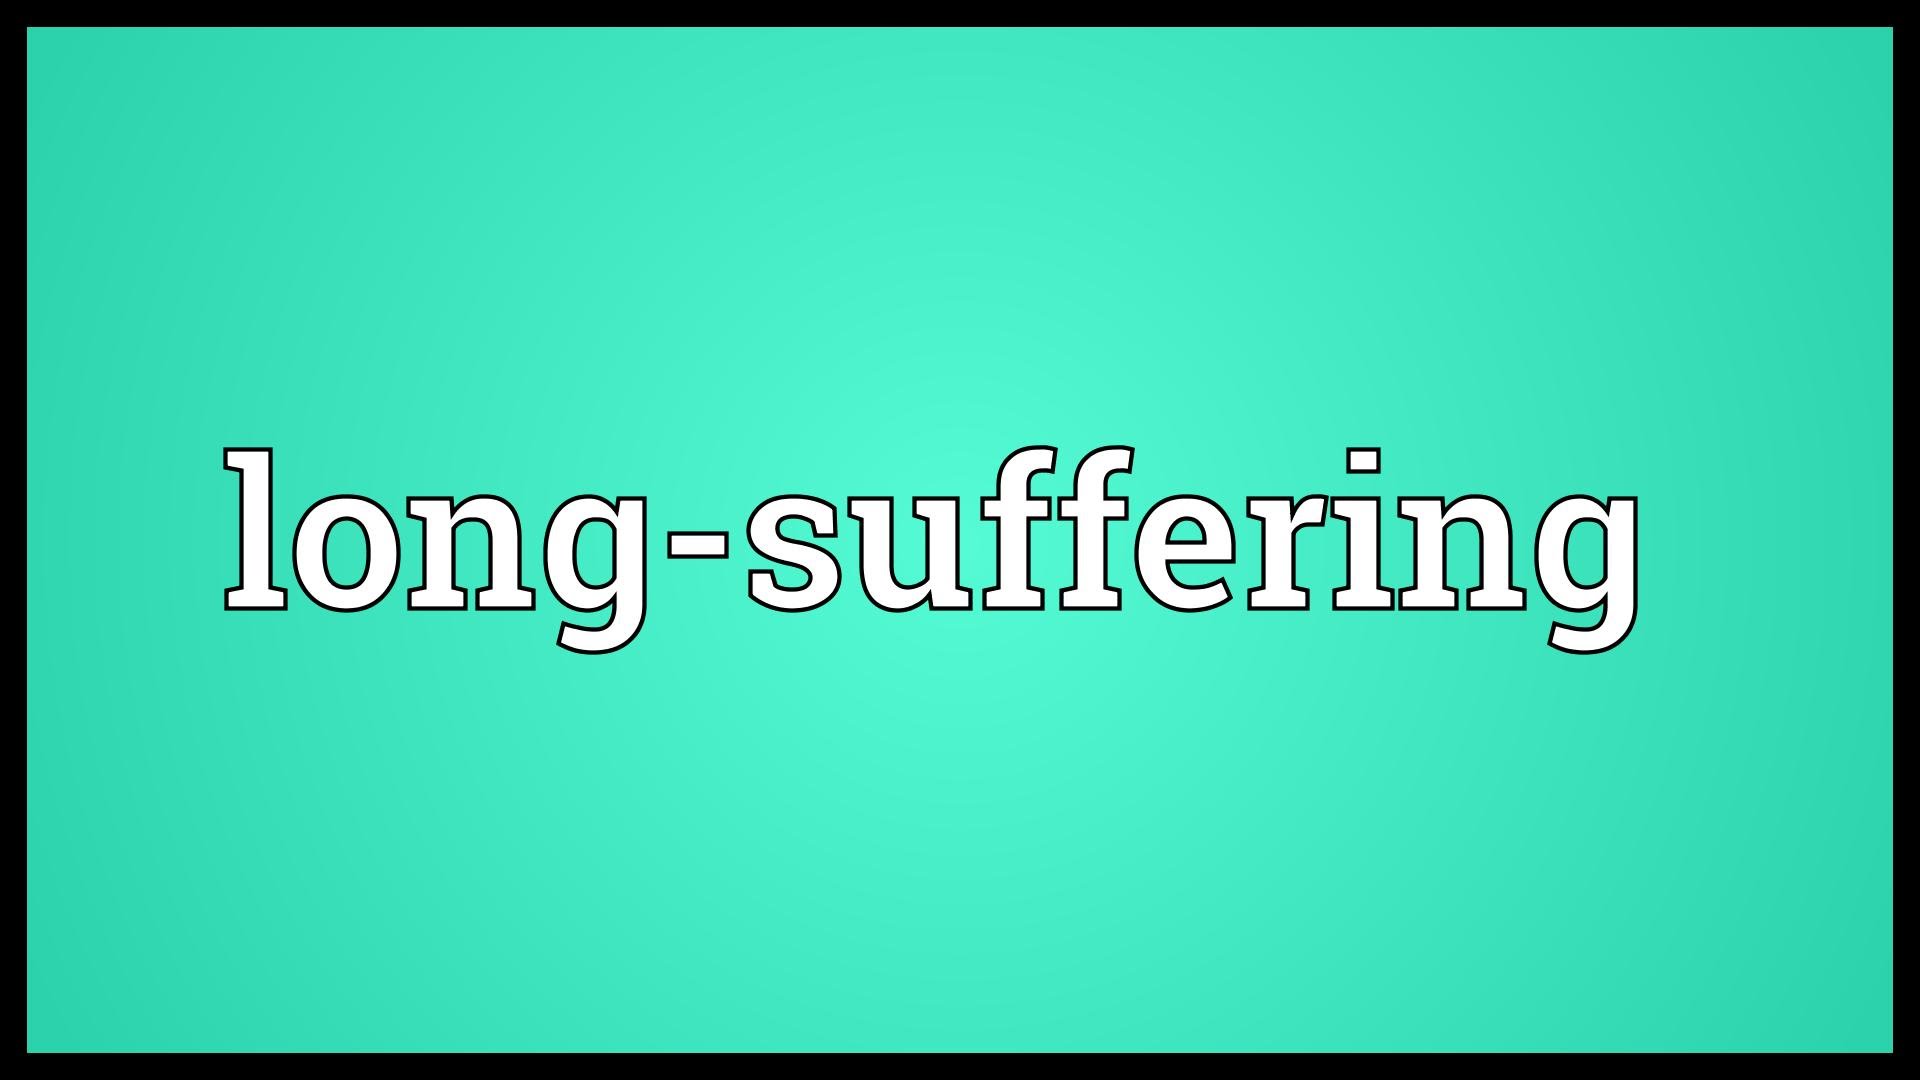 Long-suffering Meaning - YouTube